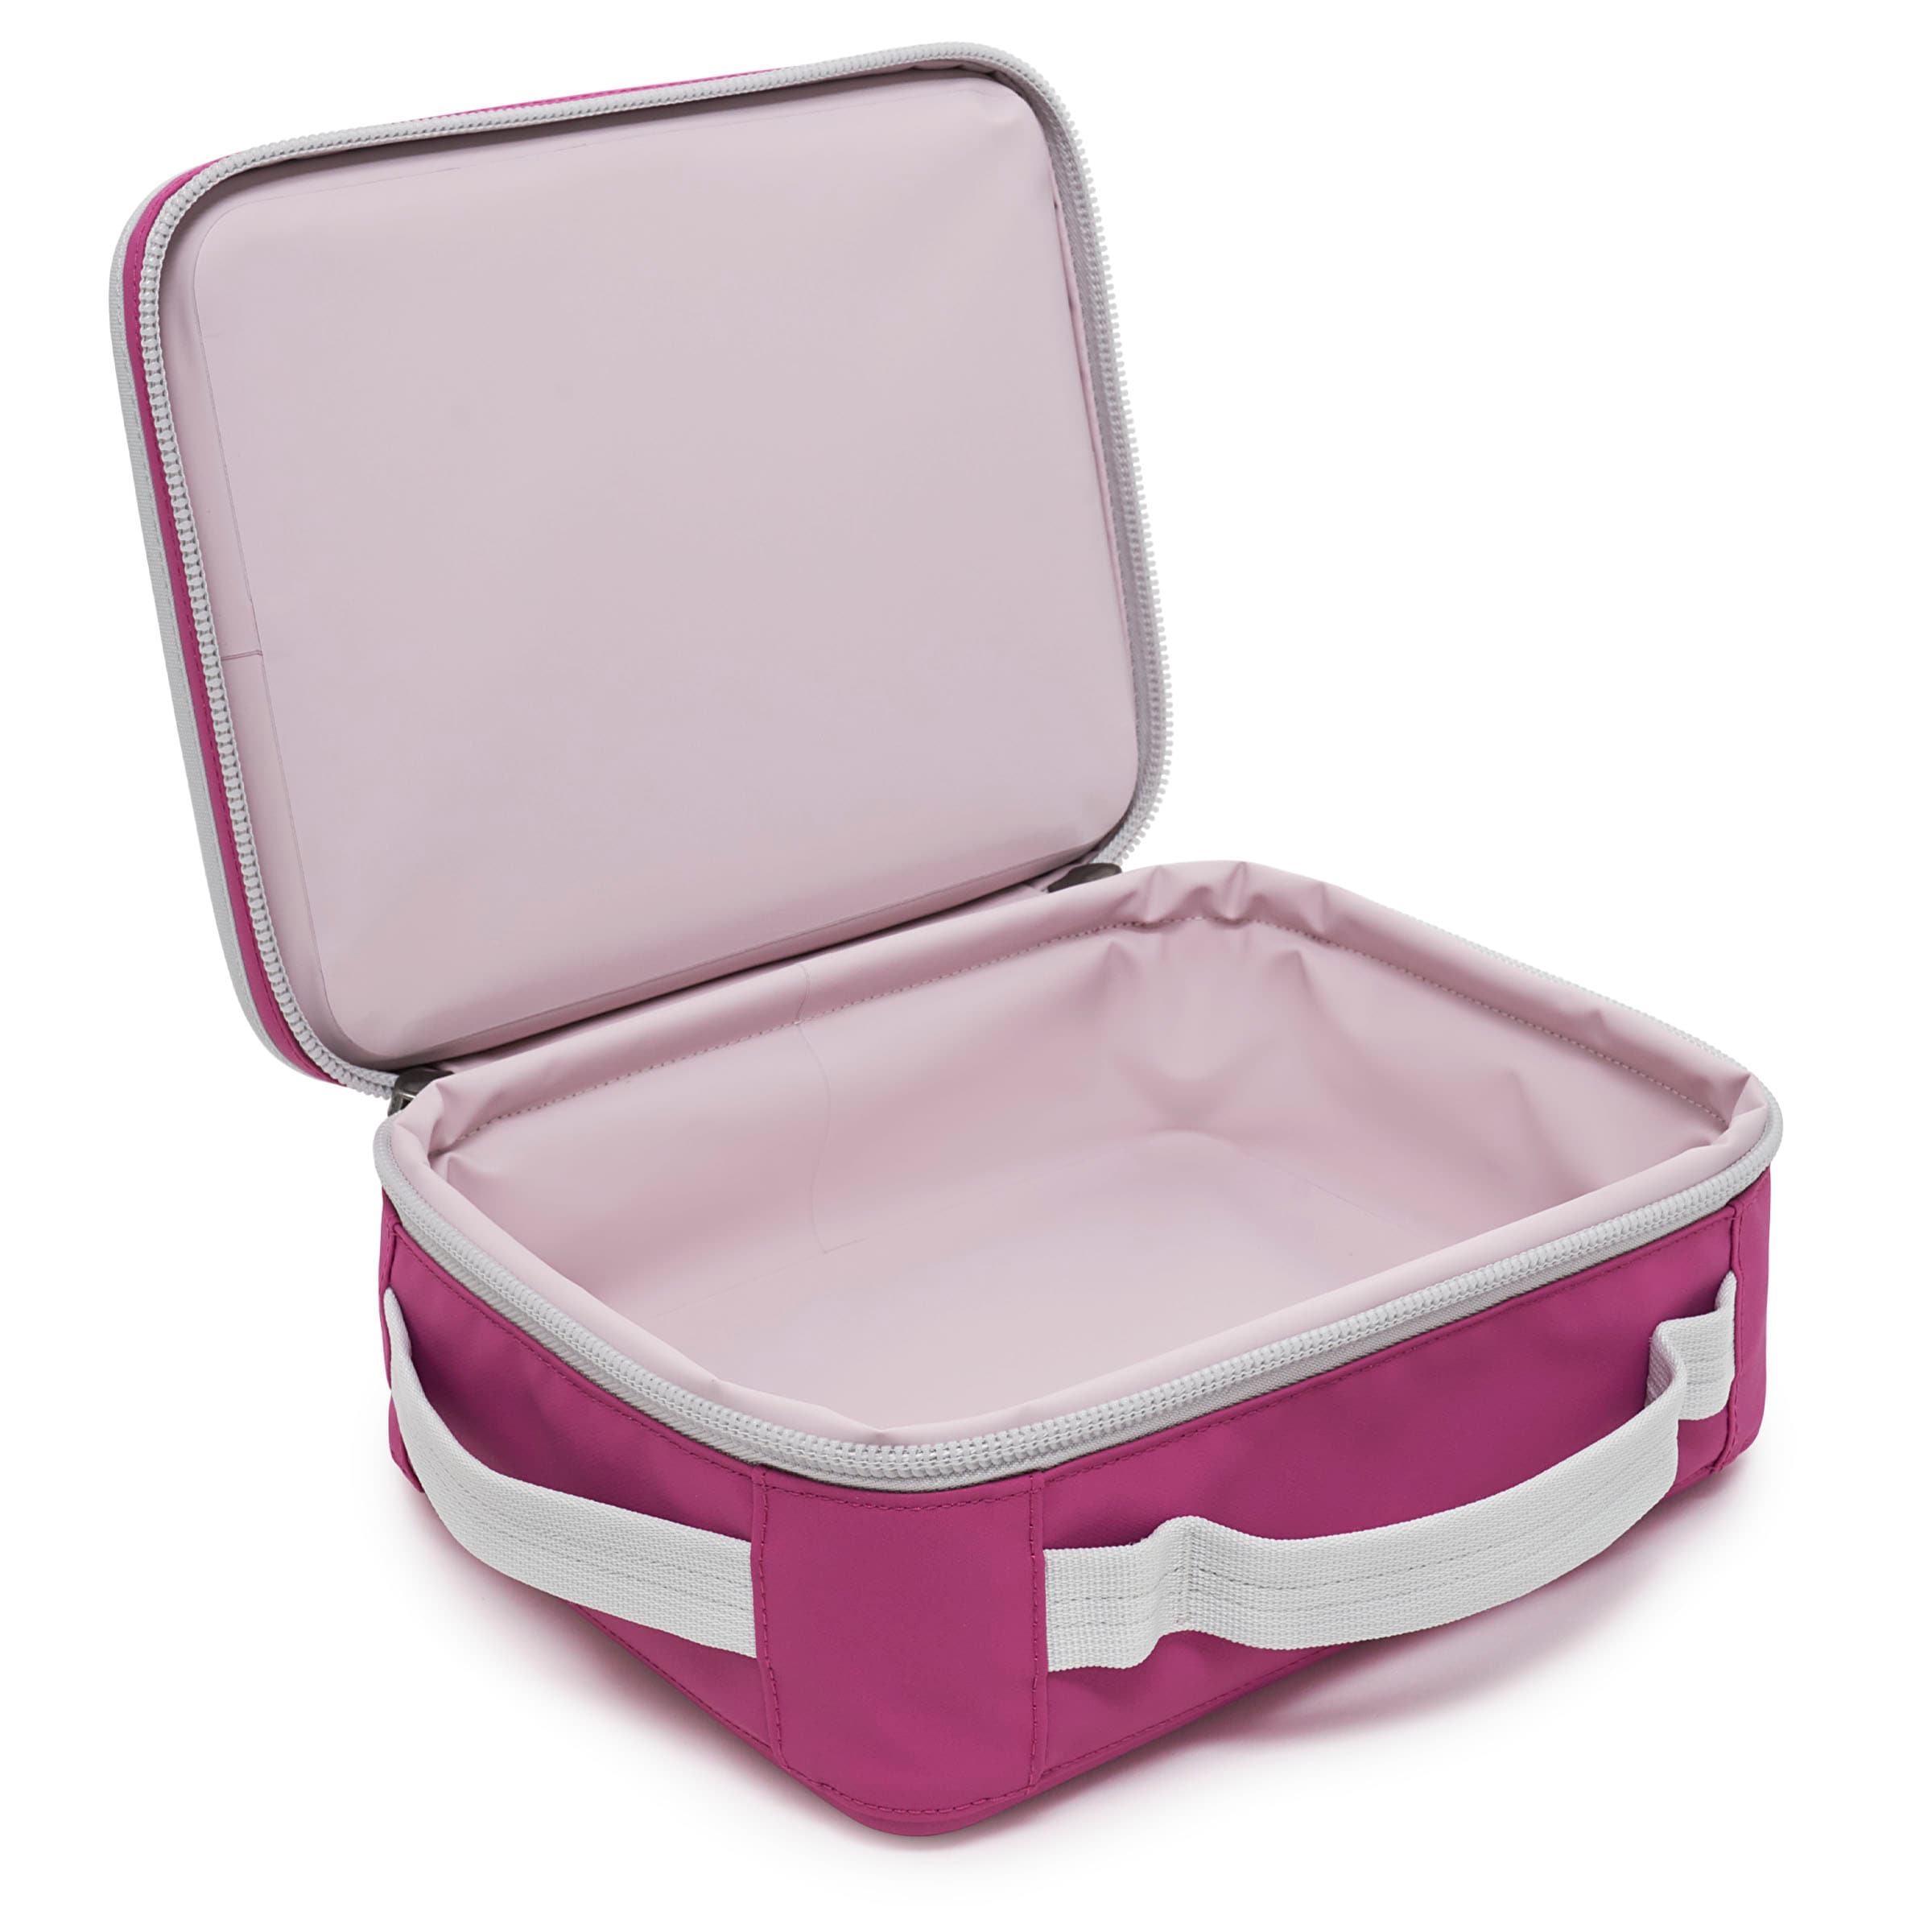 Yeti Daytrip Lunch Box Prickly Pear Pink NEW Discontinued Sold Out PPP